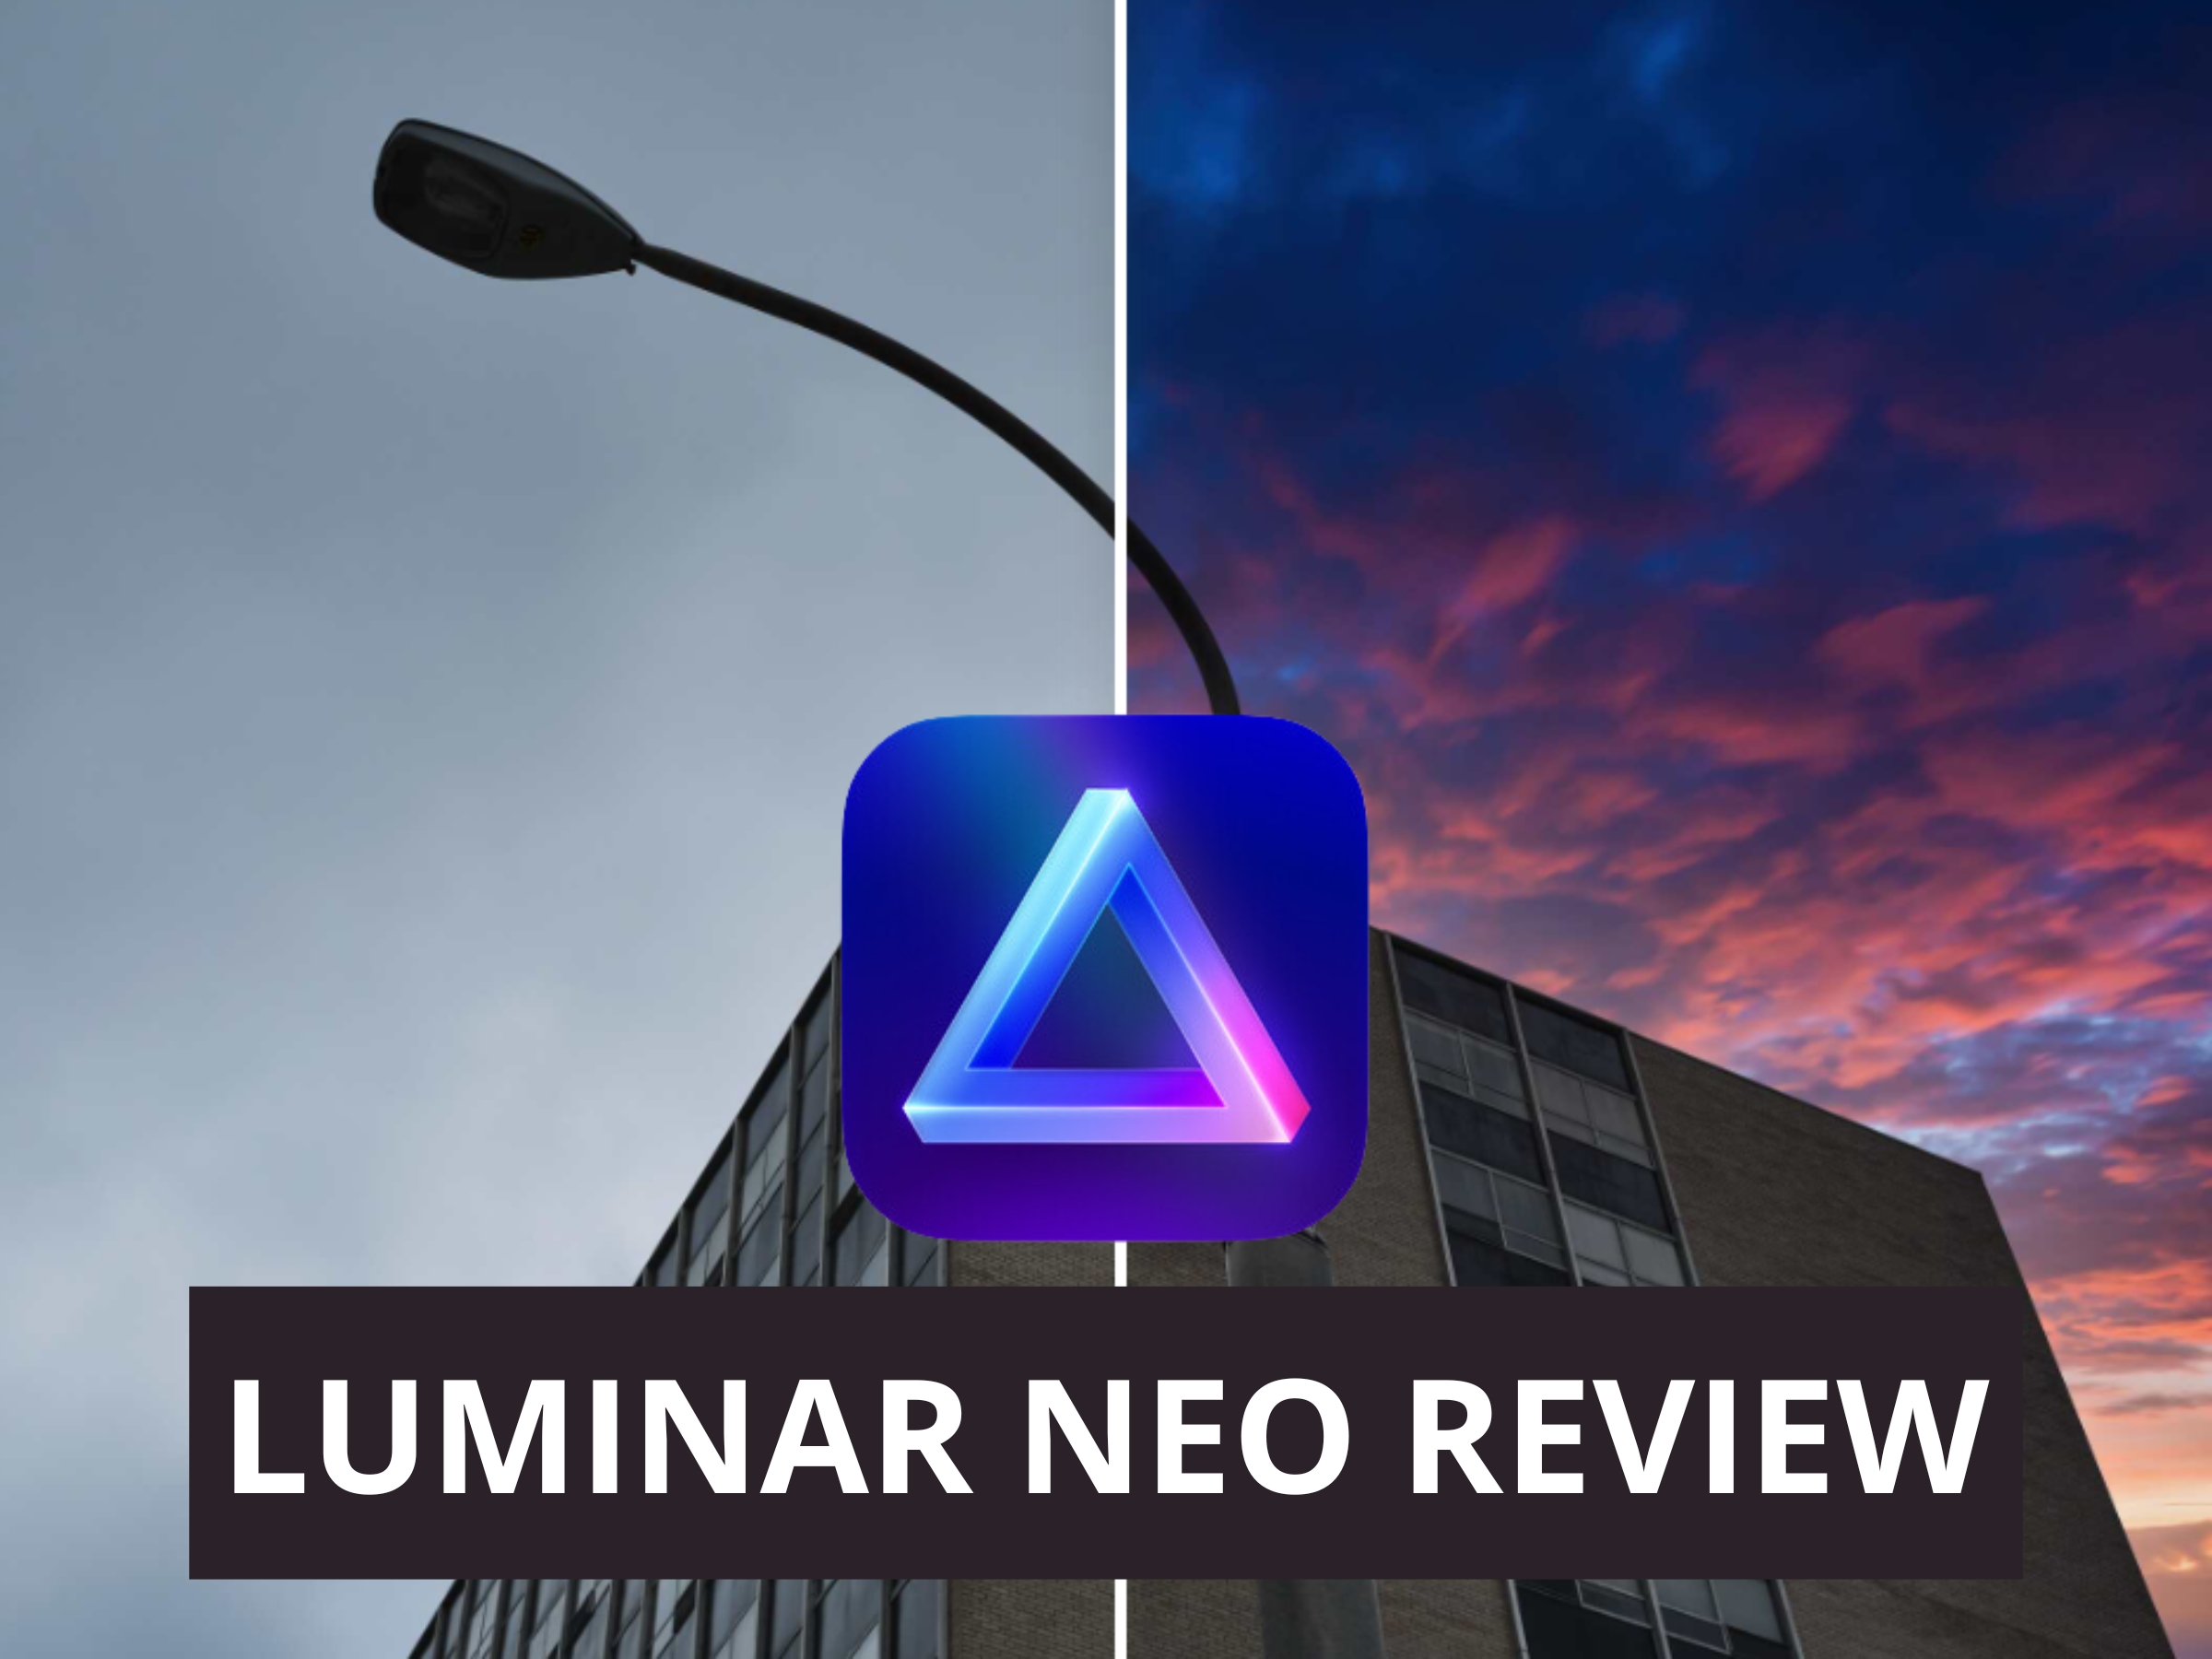 A before and after image where the sky was replaced using Luminar Neo and their logo.